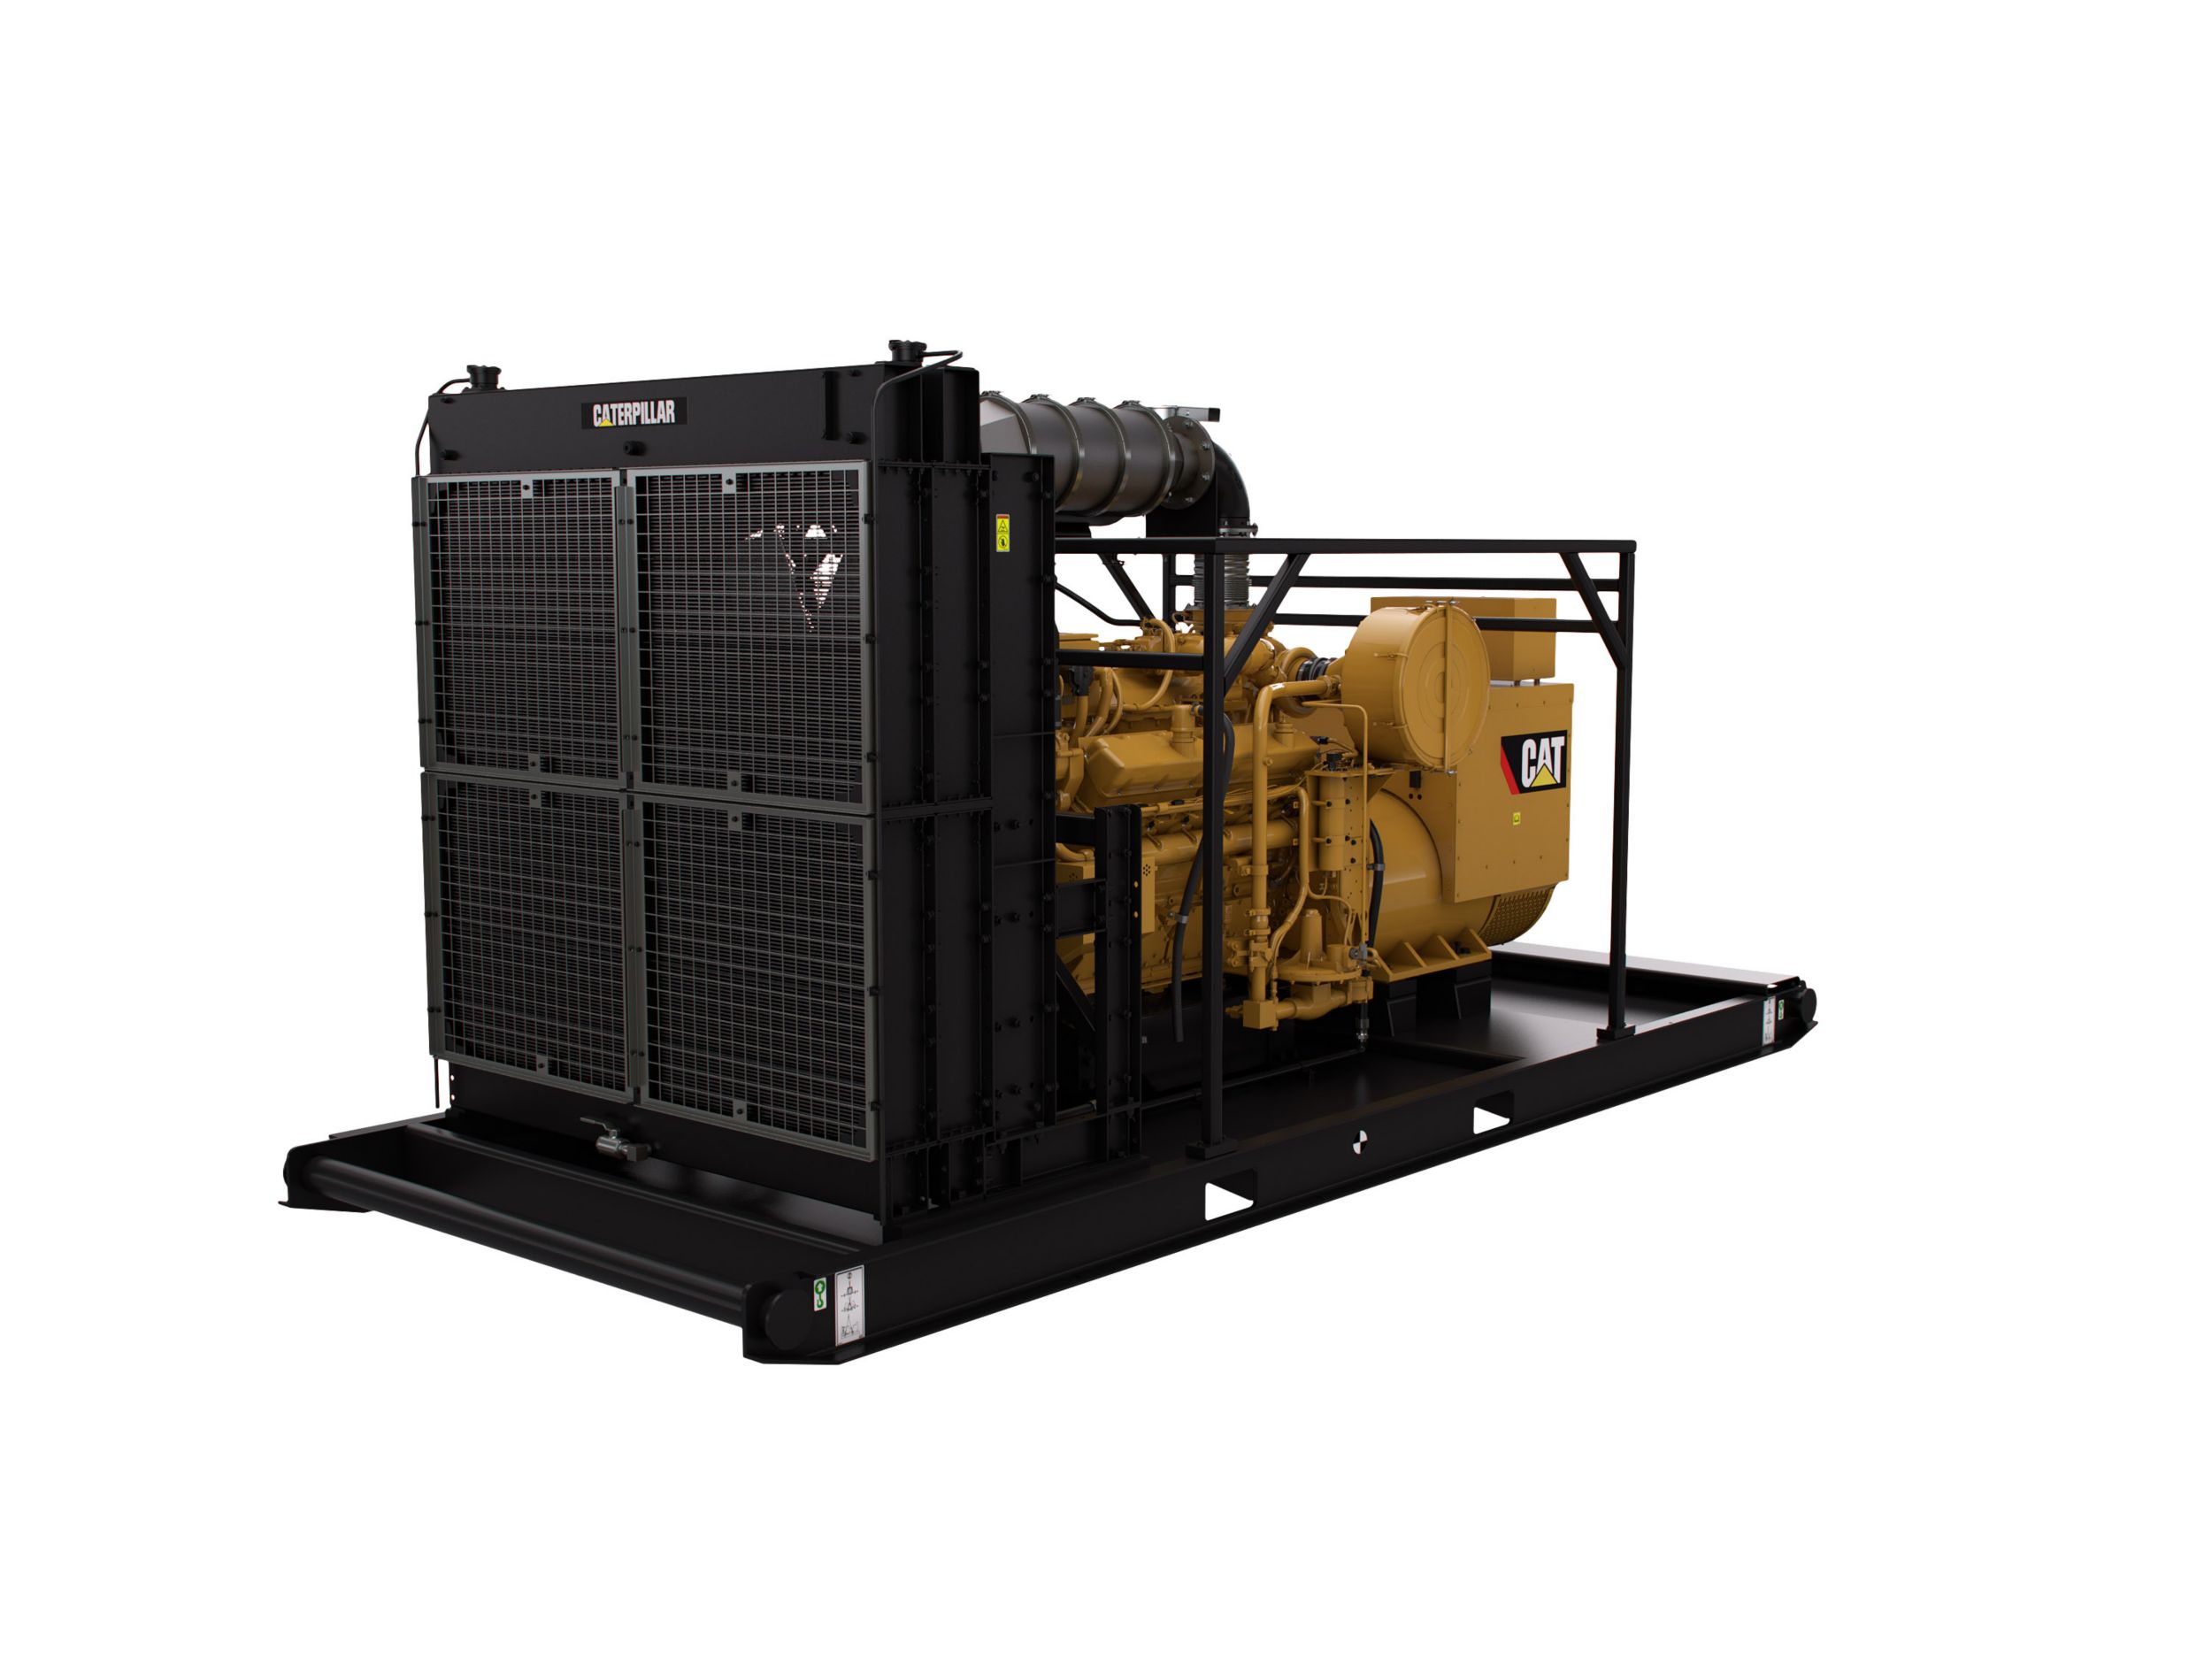 Heavy-duty Cat® oilfield gas generator sets withstand harshconditions, run on low- to no-cost well site gas without sacrificing performance, andsignificantly reduce fuel costs